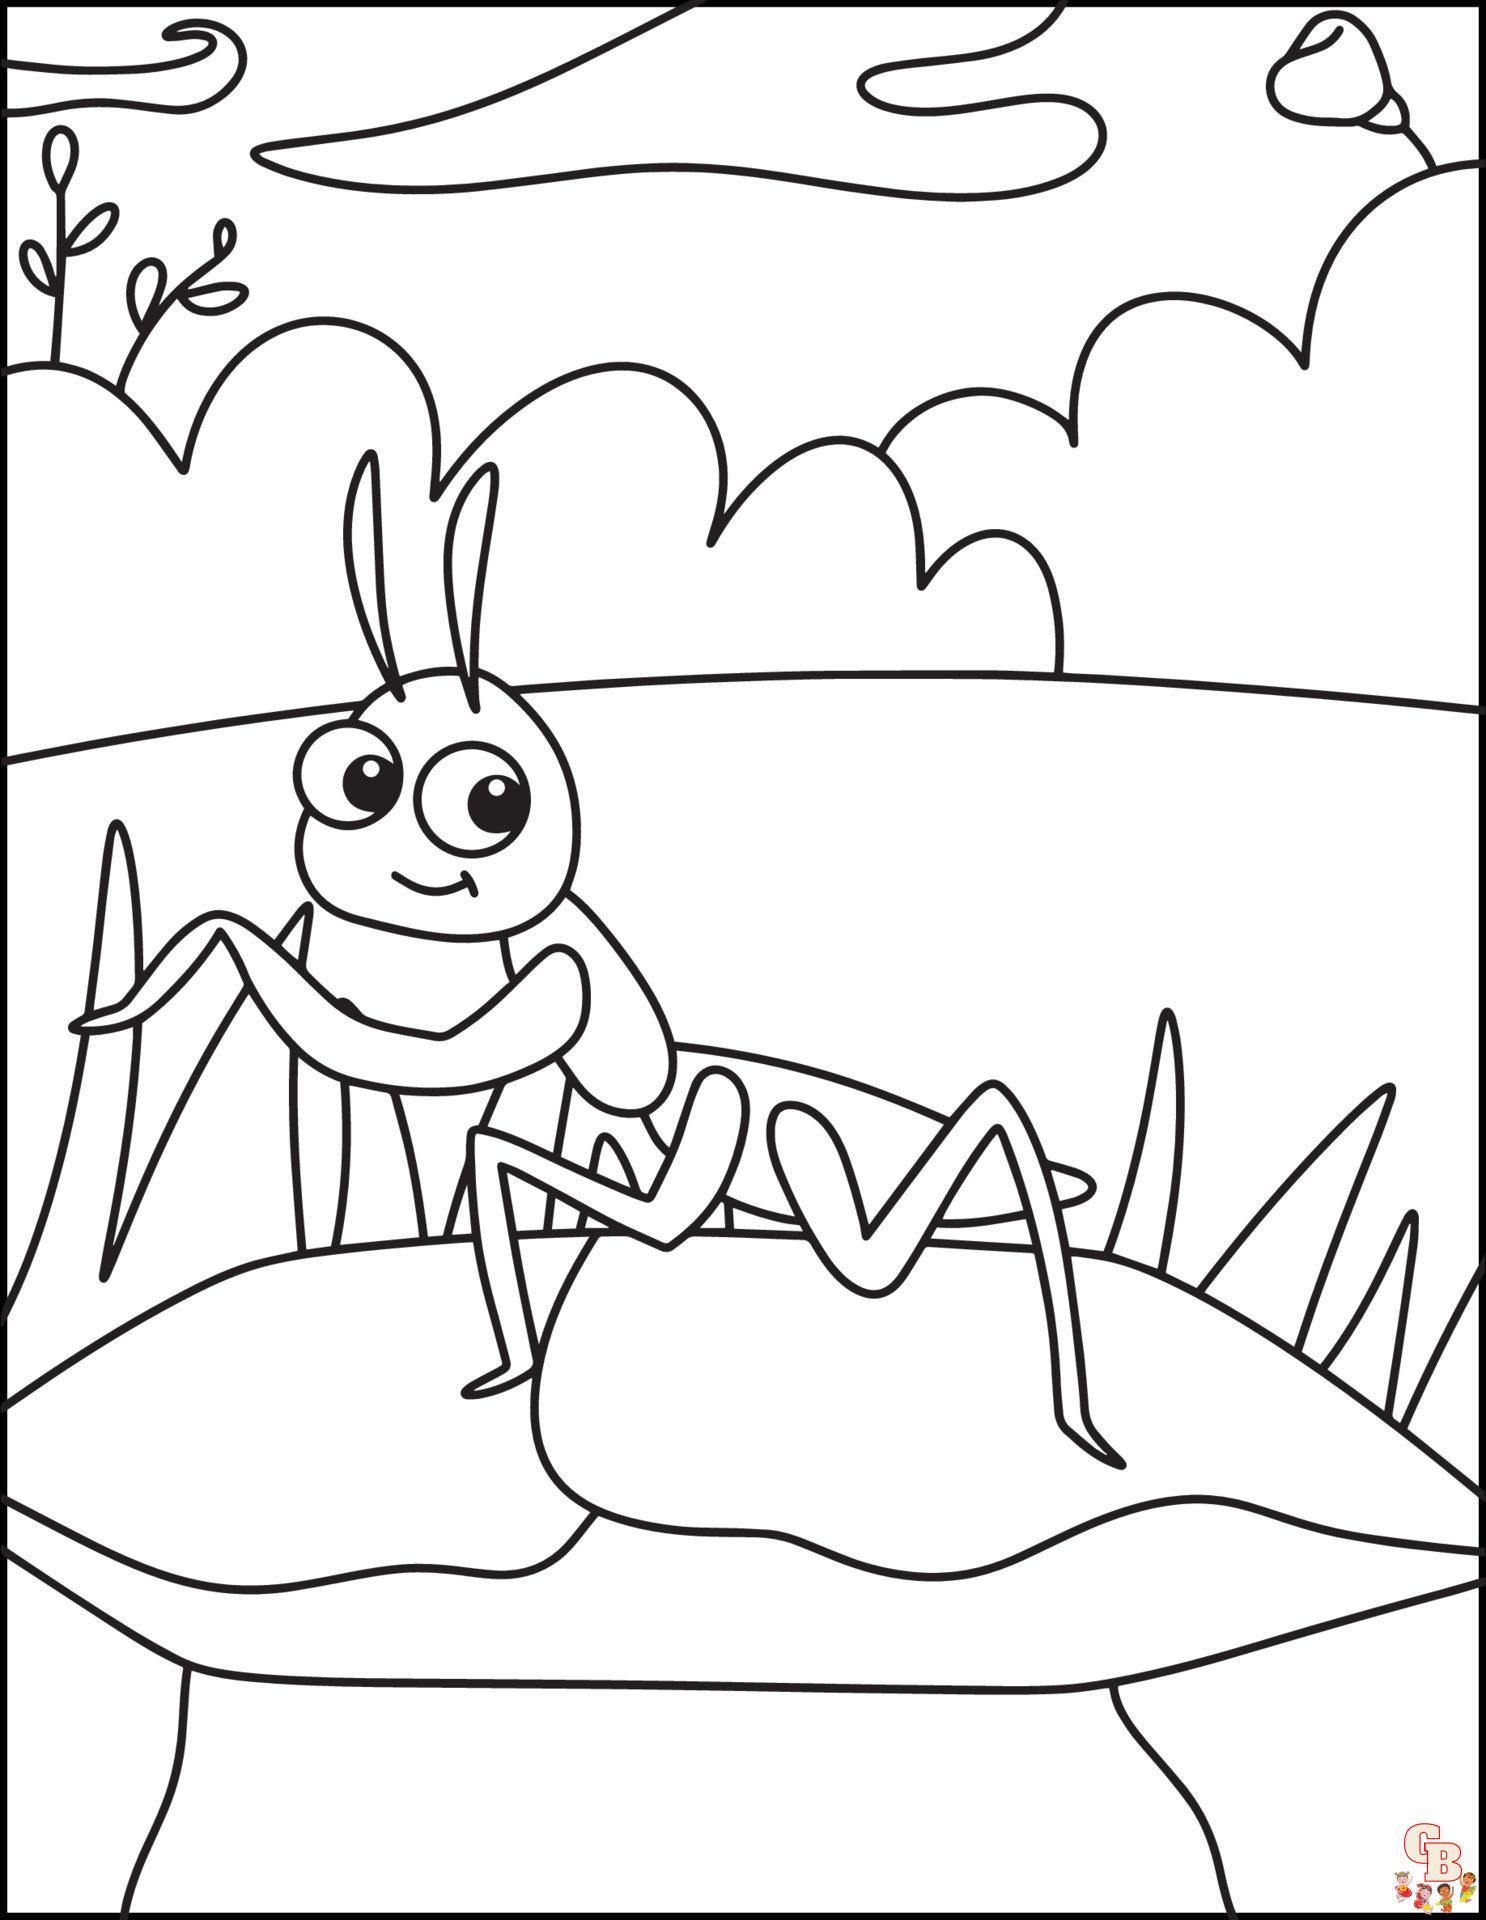 Coloriage Insectes